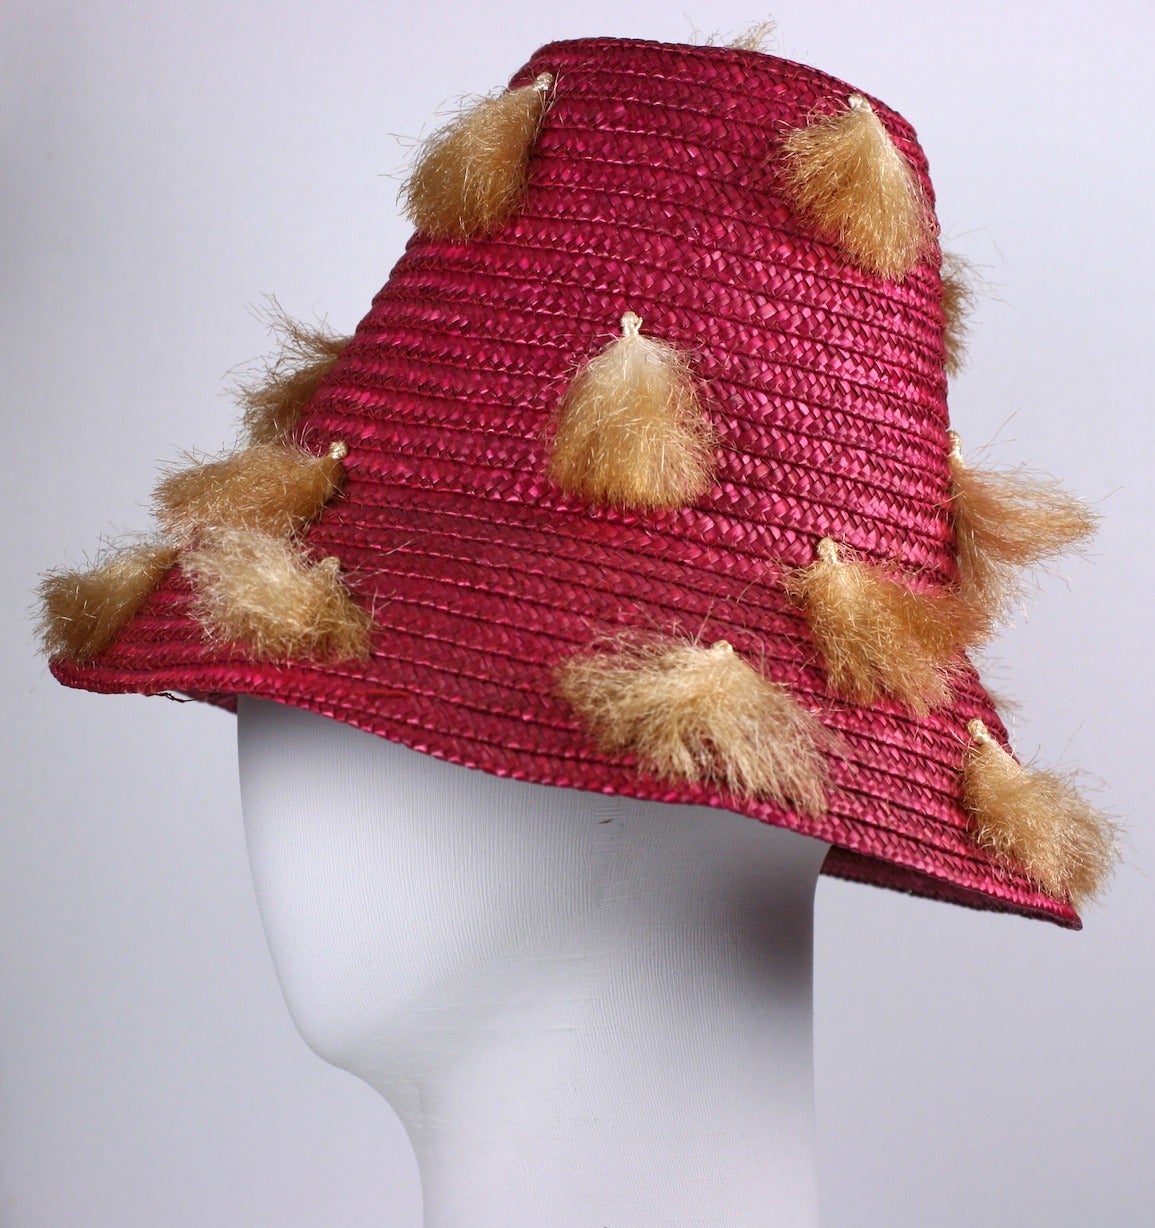 1950's Italian fuschia red woven straw beach hat with tan raffia tassel pom pom  decorations applied all over. Made in Italy. 1950's.
6